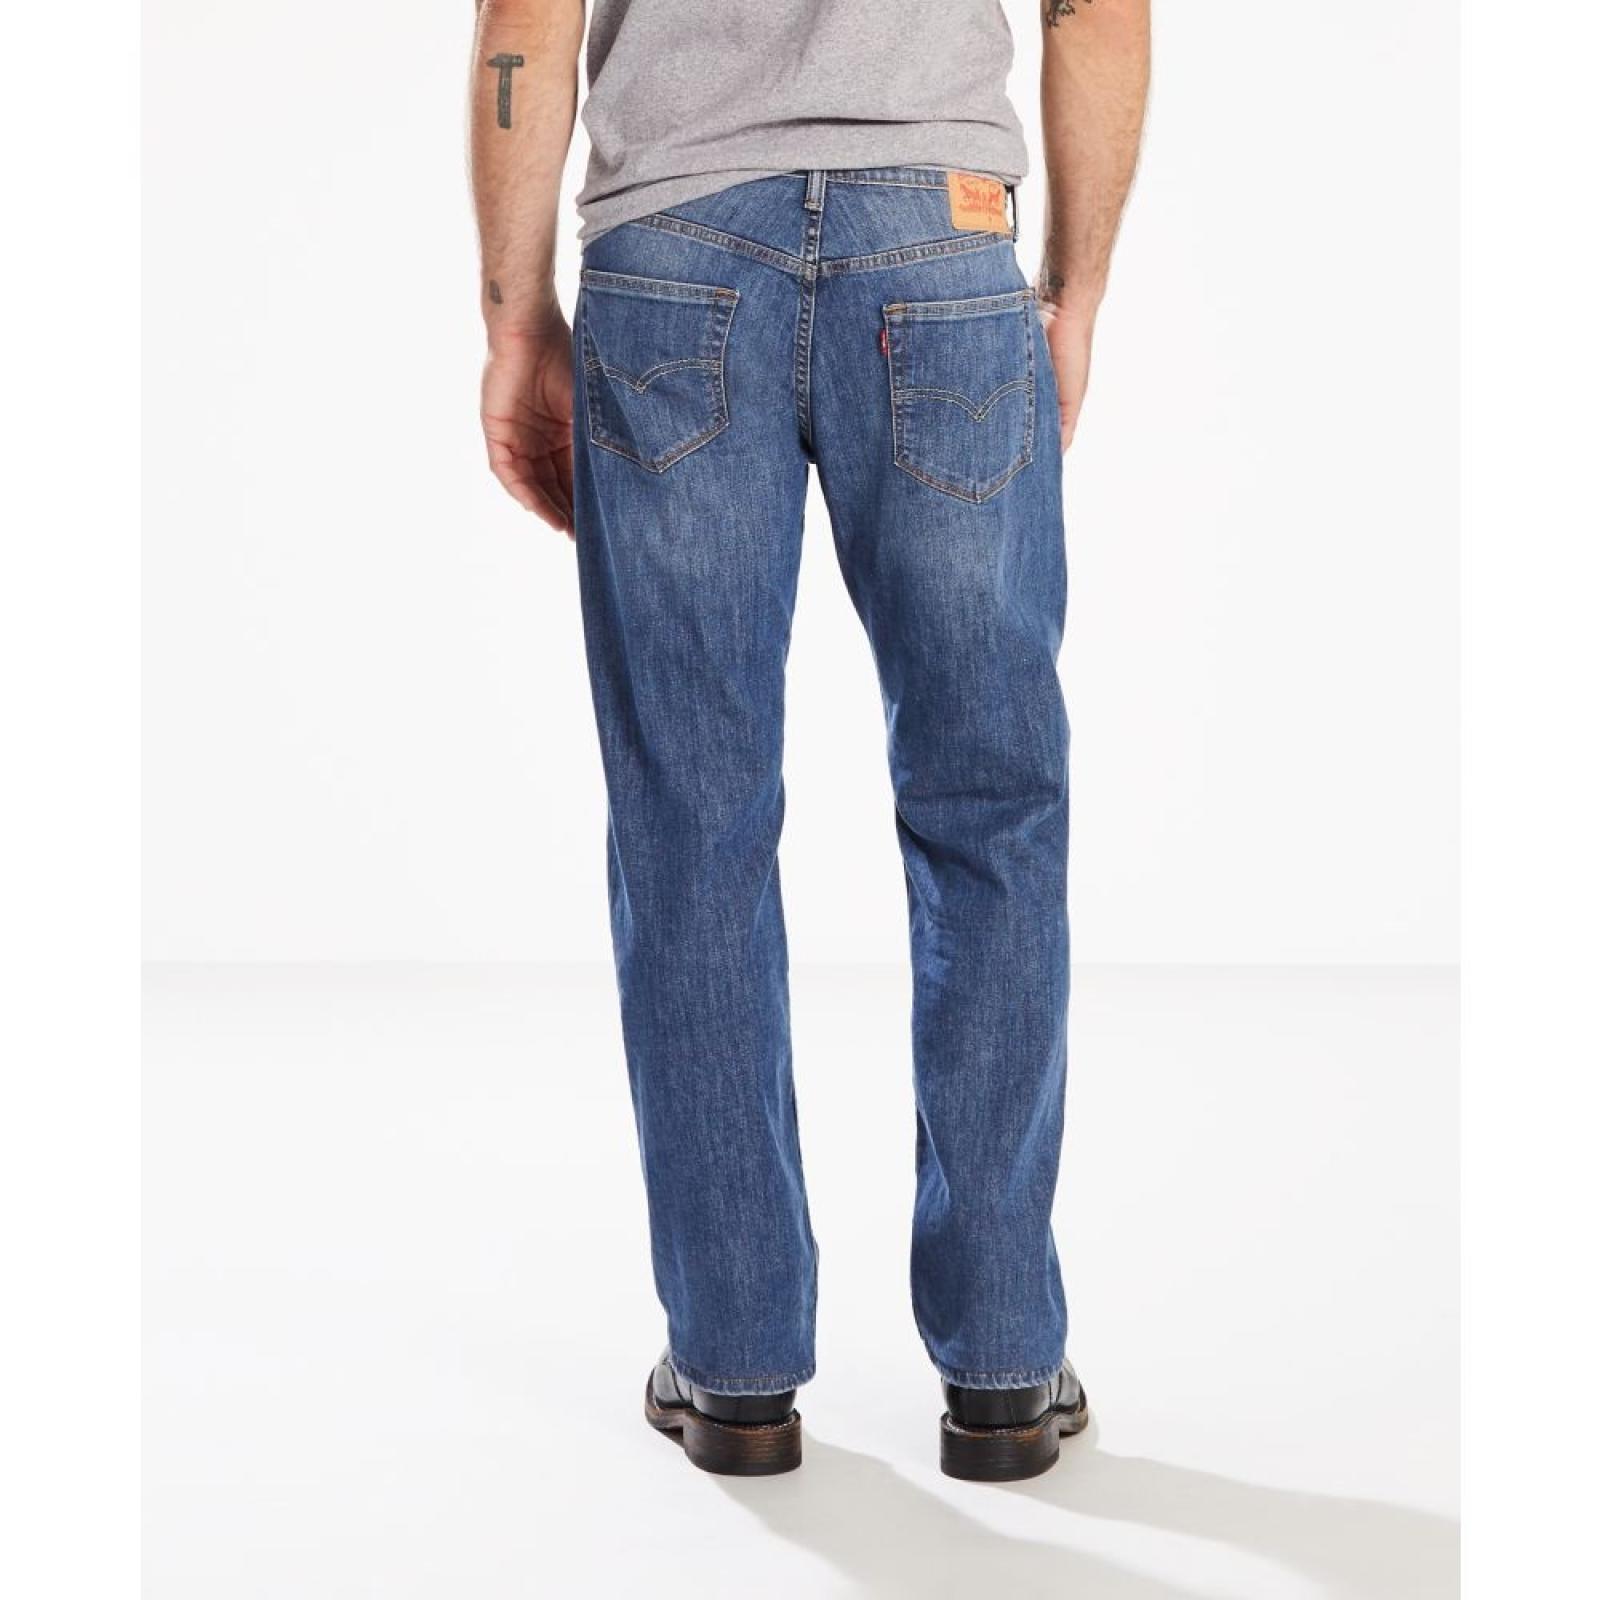 Levi's 559™ Relaxed Straight Men's Jeans